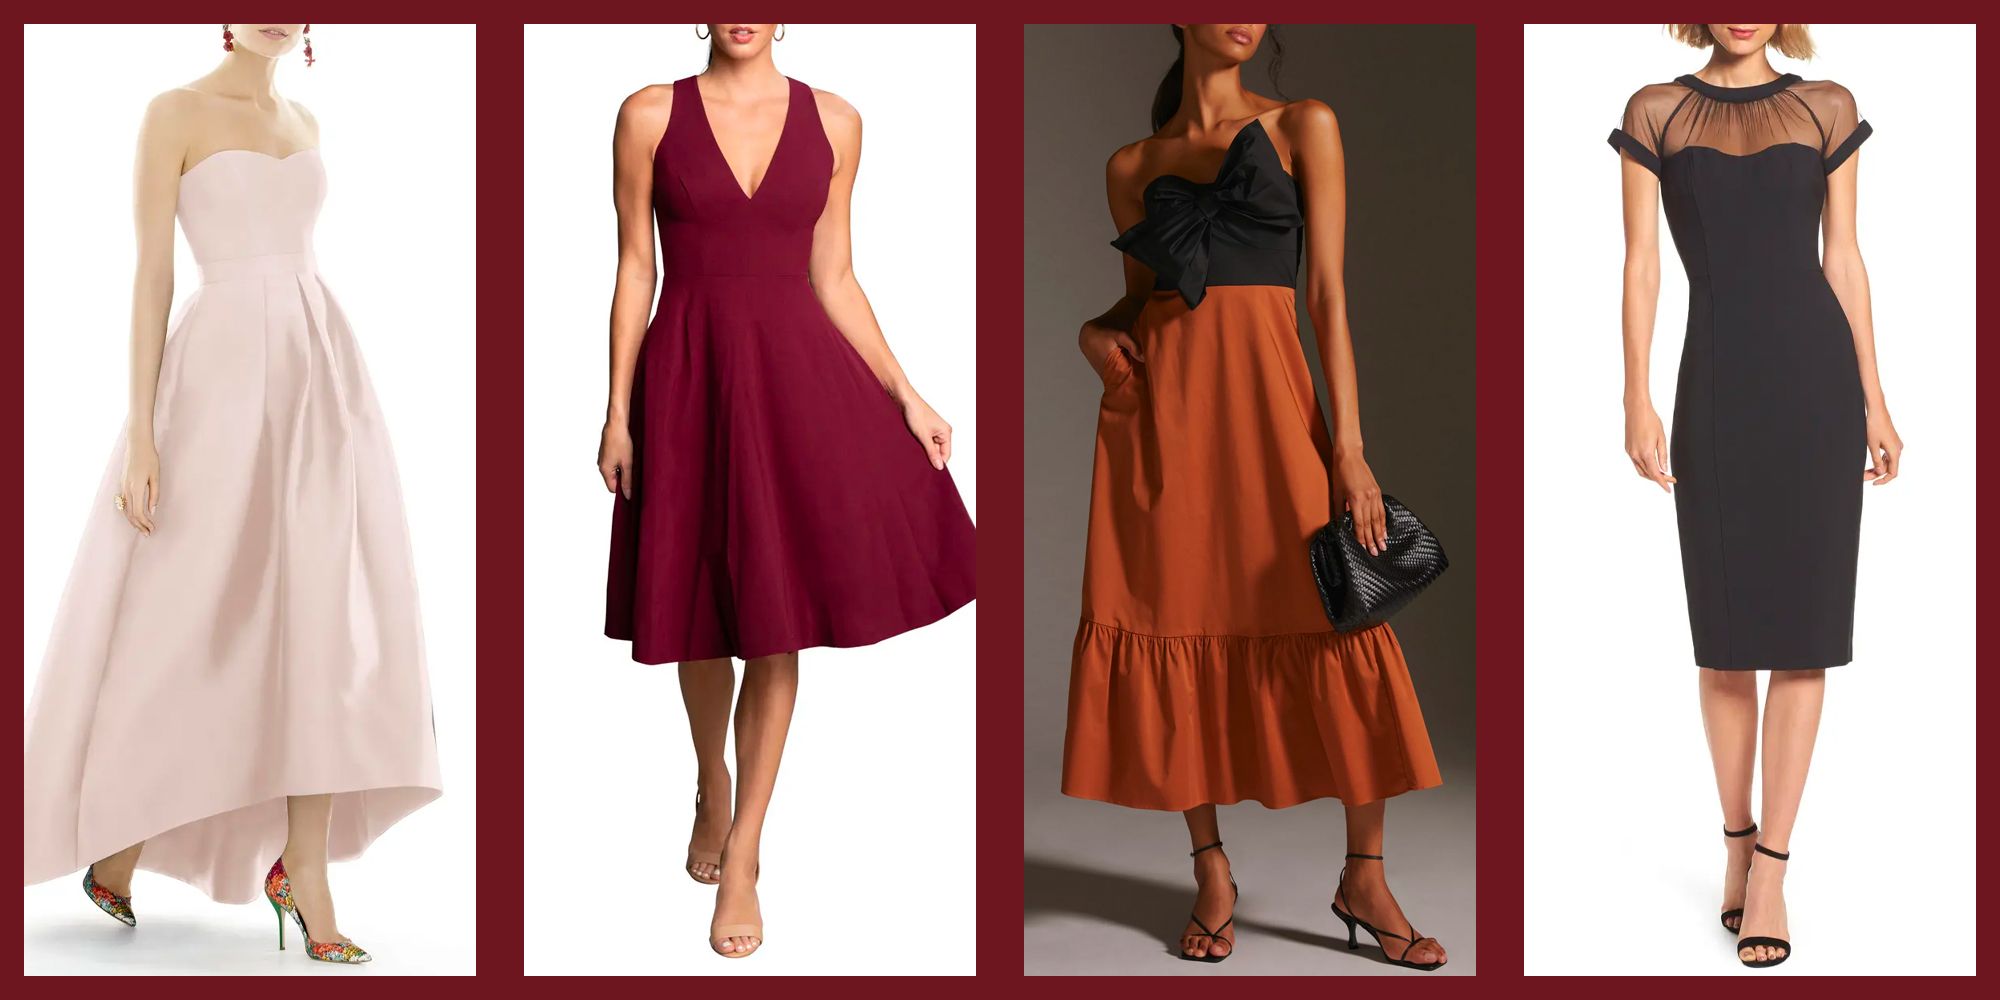 fit and flare dress for wedding guest